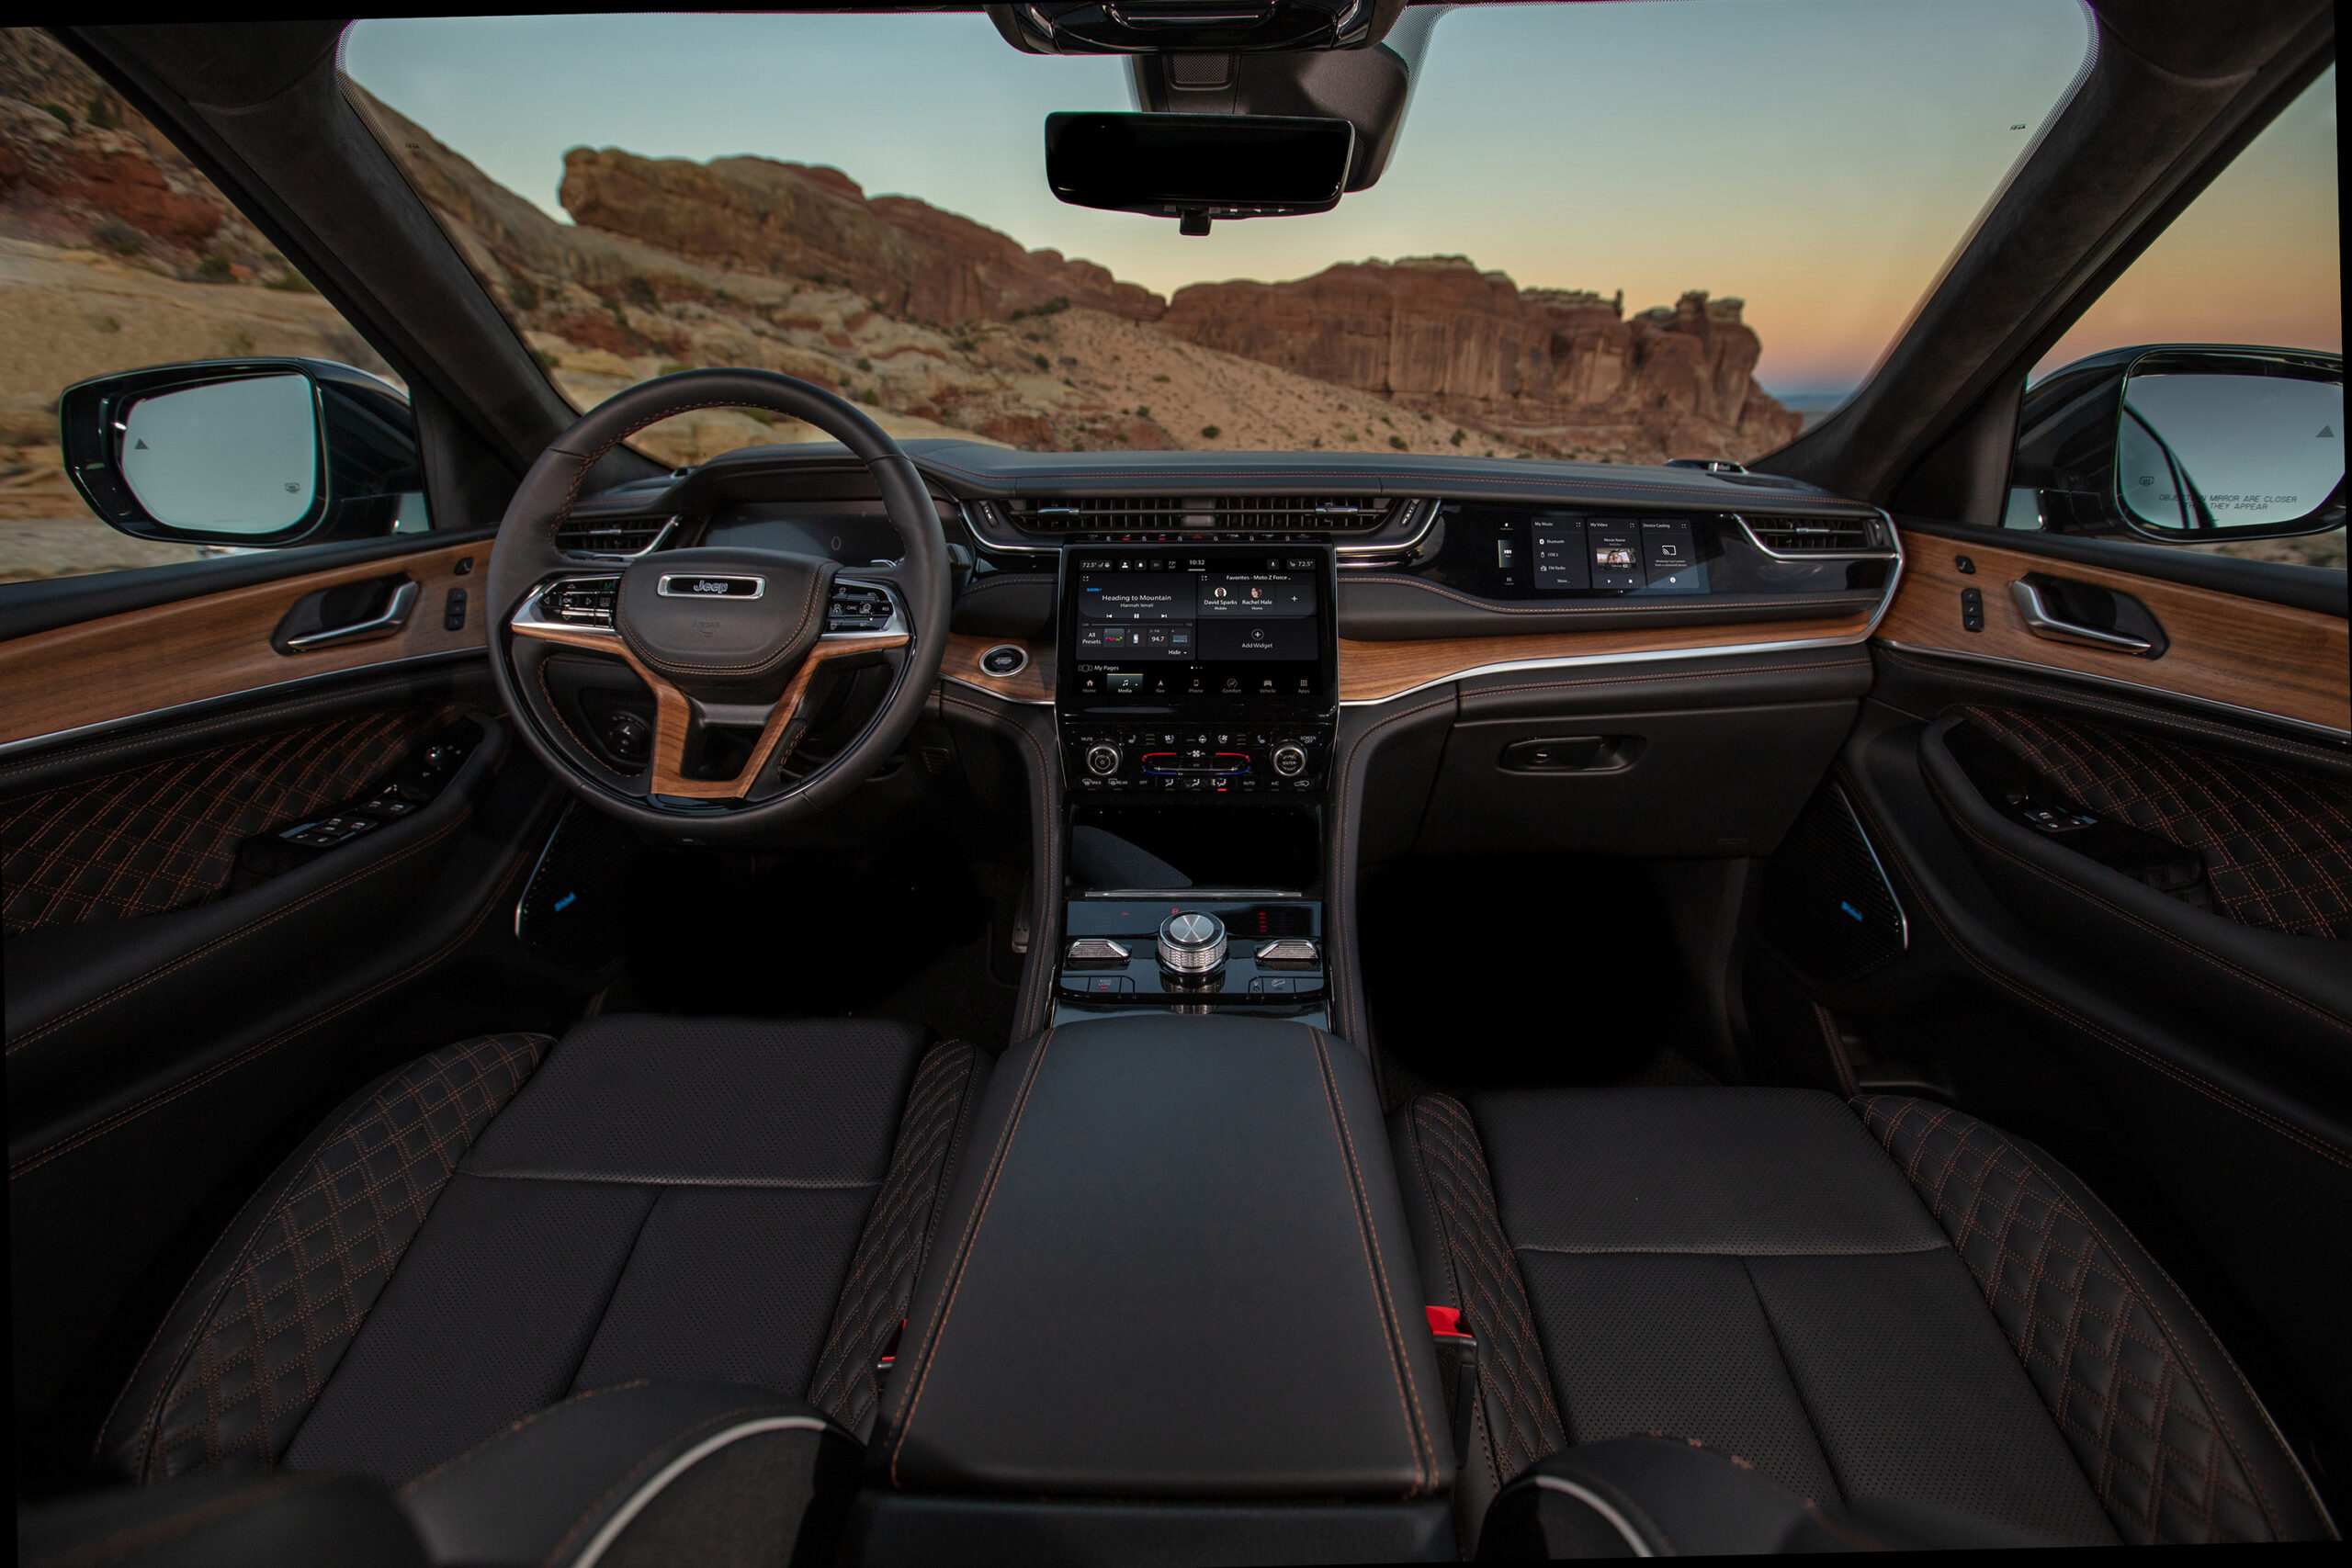 2022 Jeep Grand Cherokee Styling & Interior Features